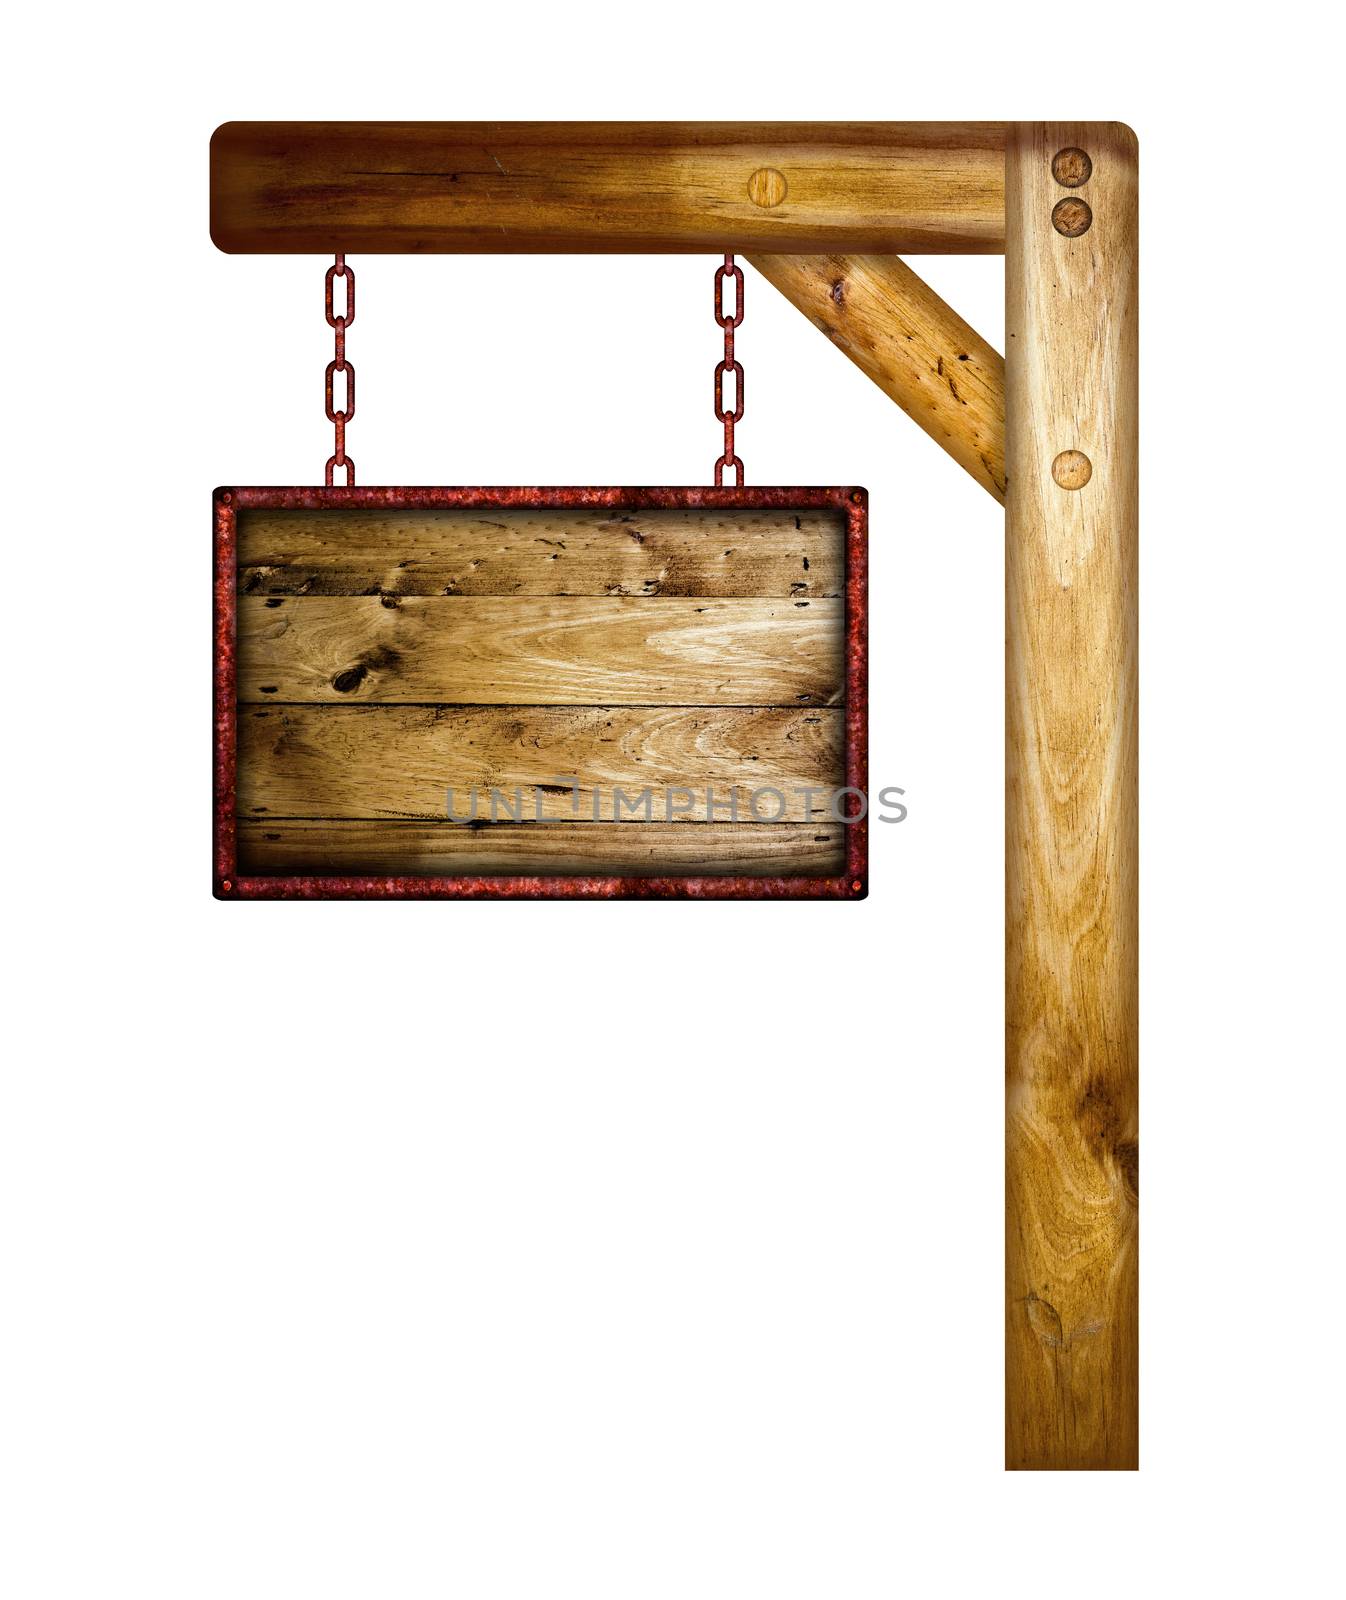 Wooden hanging sign over a white background.